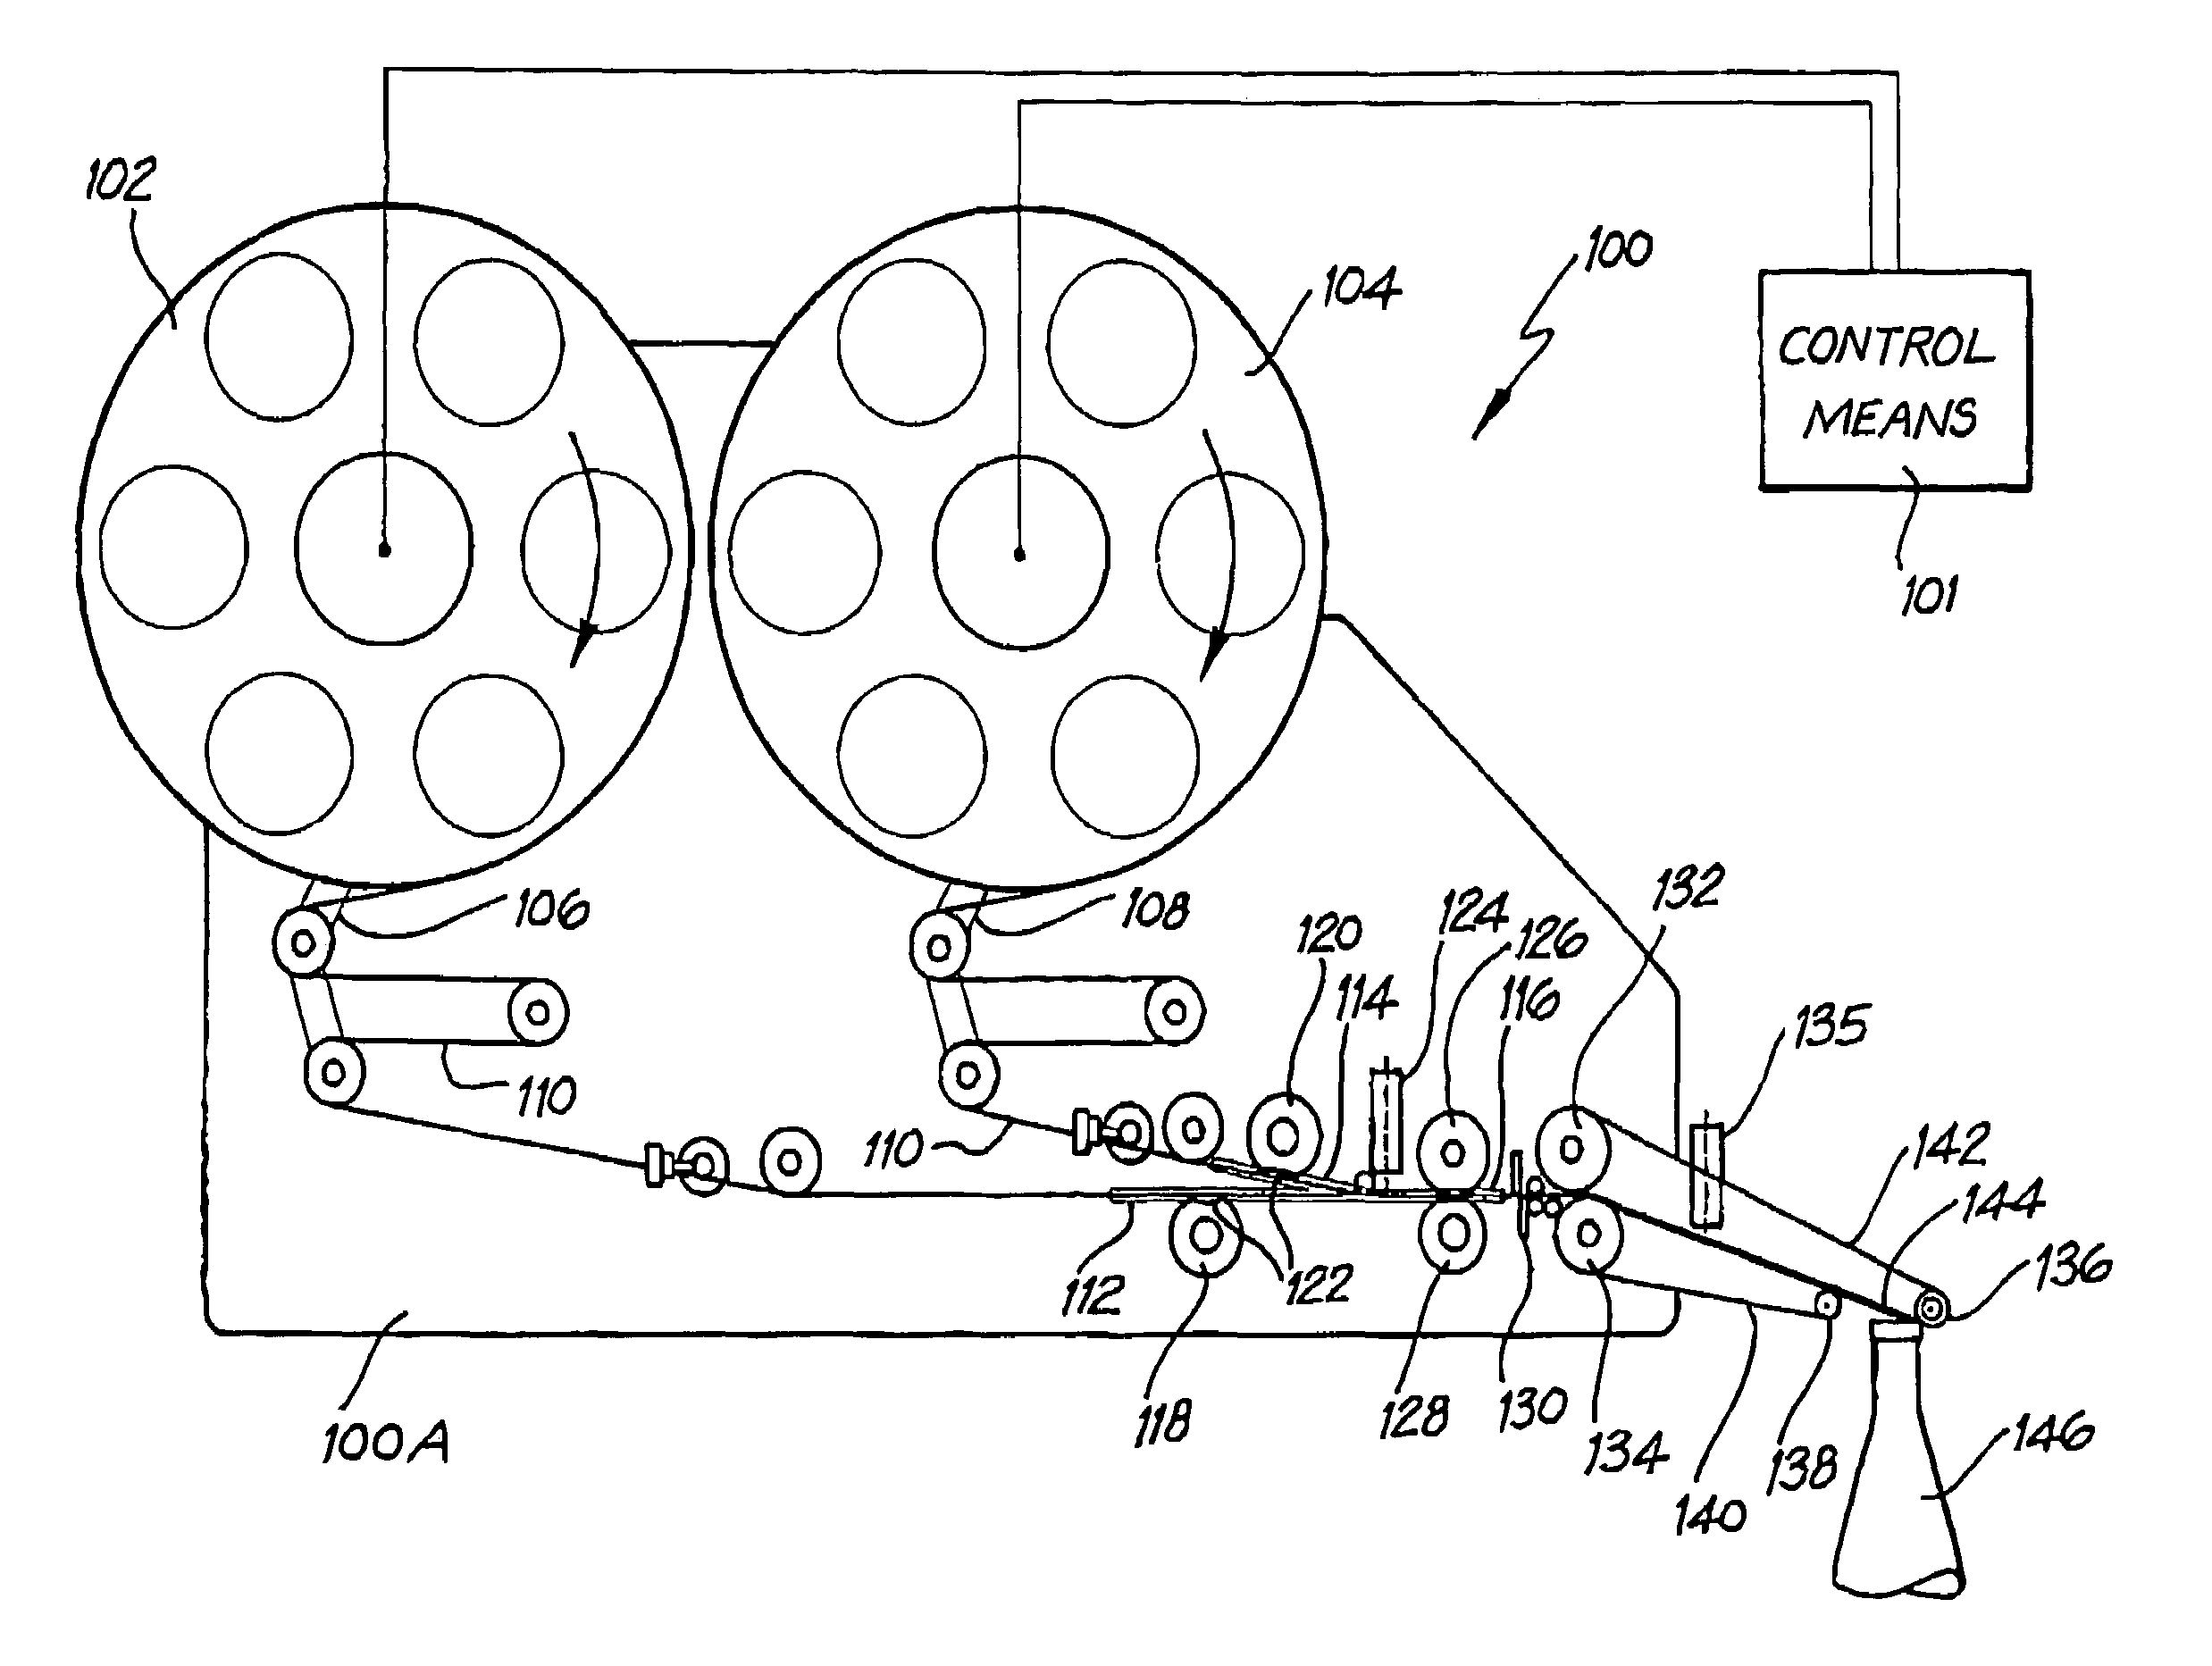 Methods and apparatus for producing and for applying labels